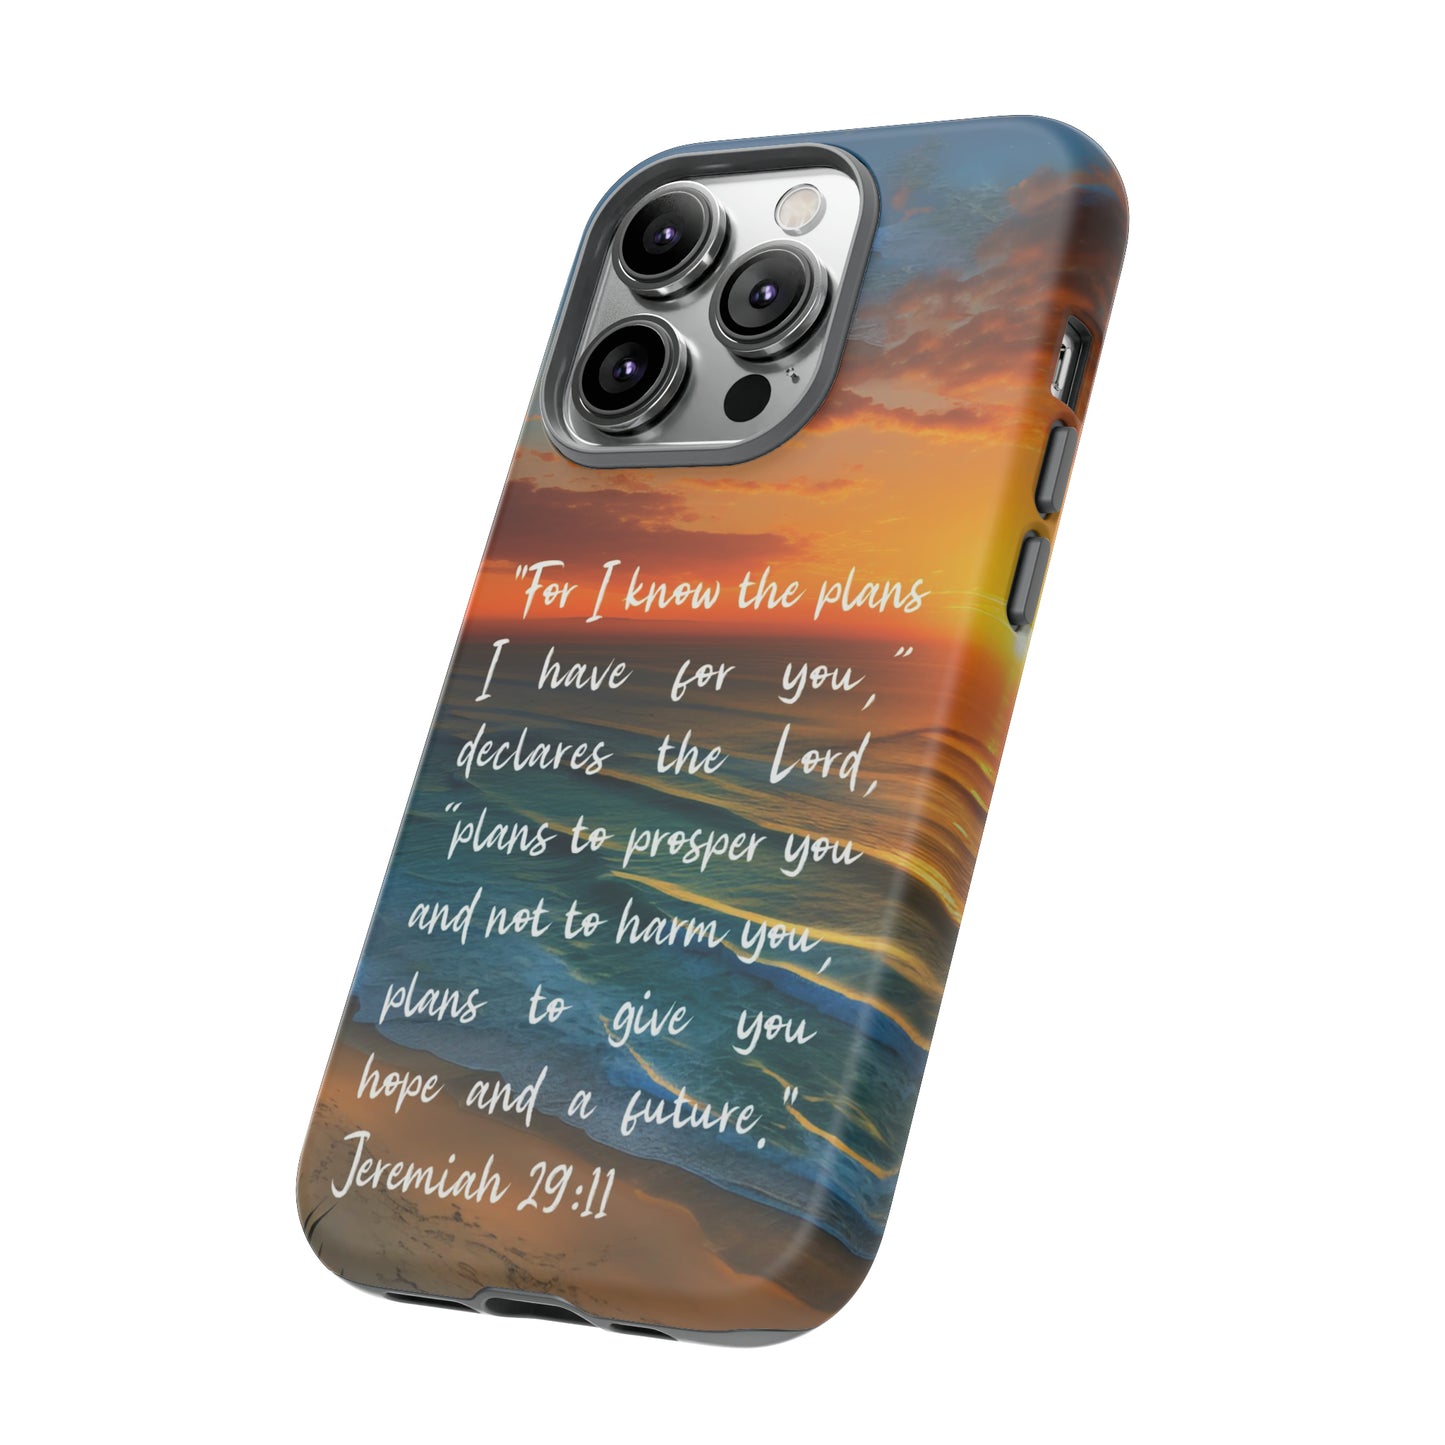 Jeremiah 29:11 Tough Christian Phone Case iPhone Samsung Galaxy Google Pixel I Know The Plans I Have For You Christian Cell Phone Cases